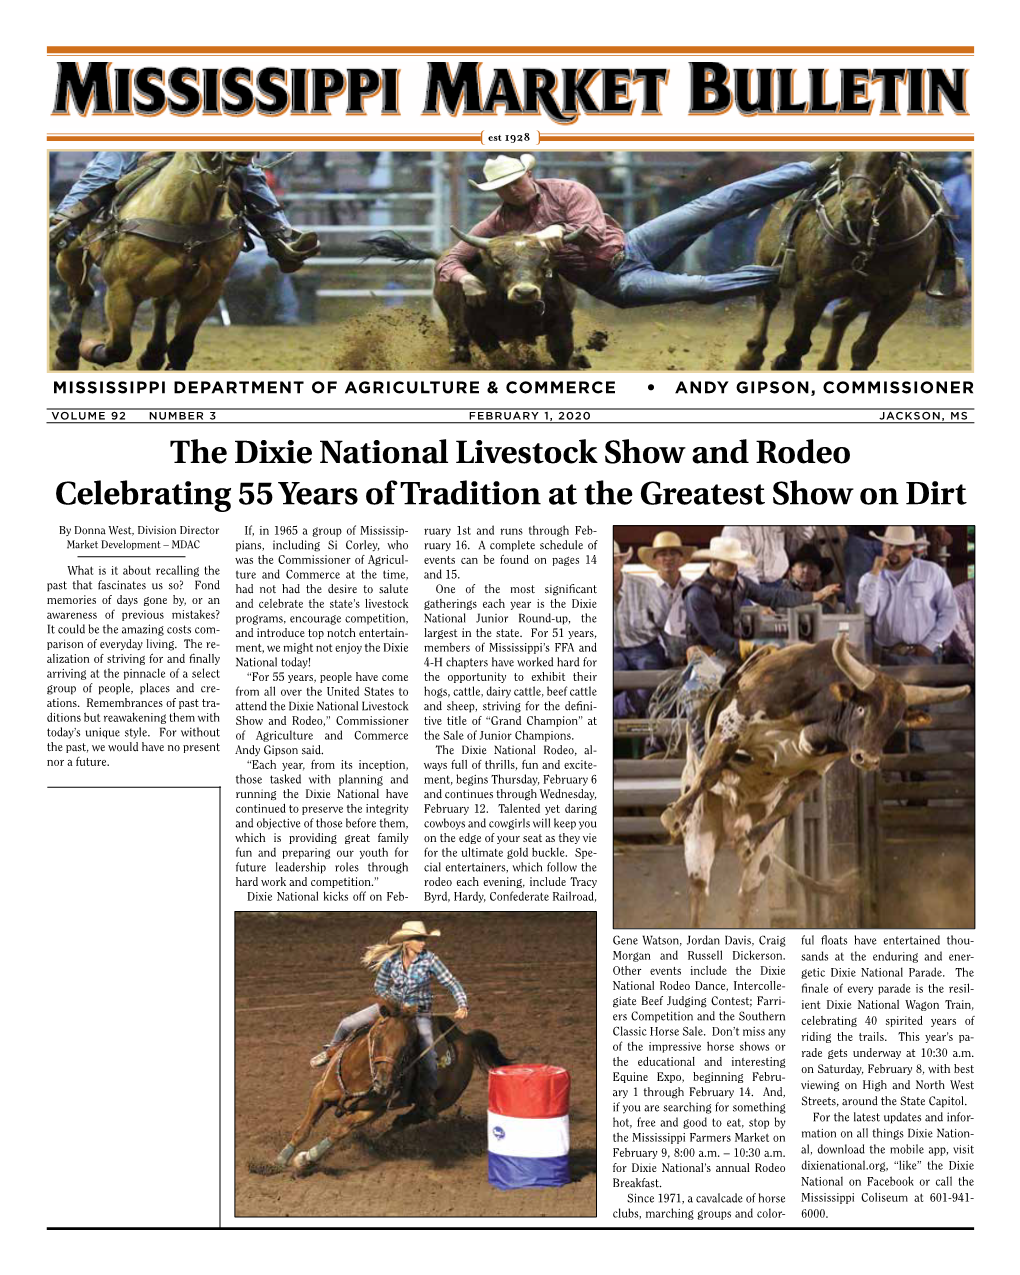 The Dixie National Livestock Show and Rodeo Celebrating 55 Years of Tradition at the Greatest Show on Dirt